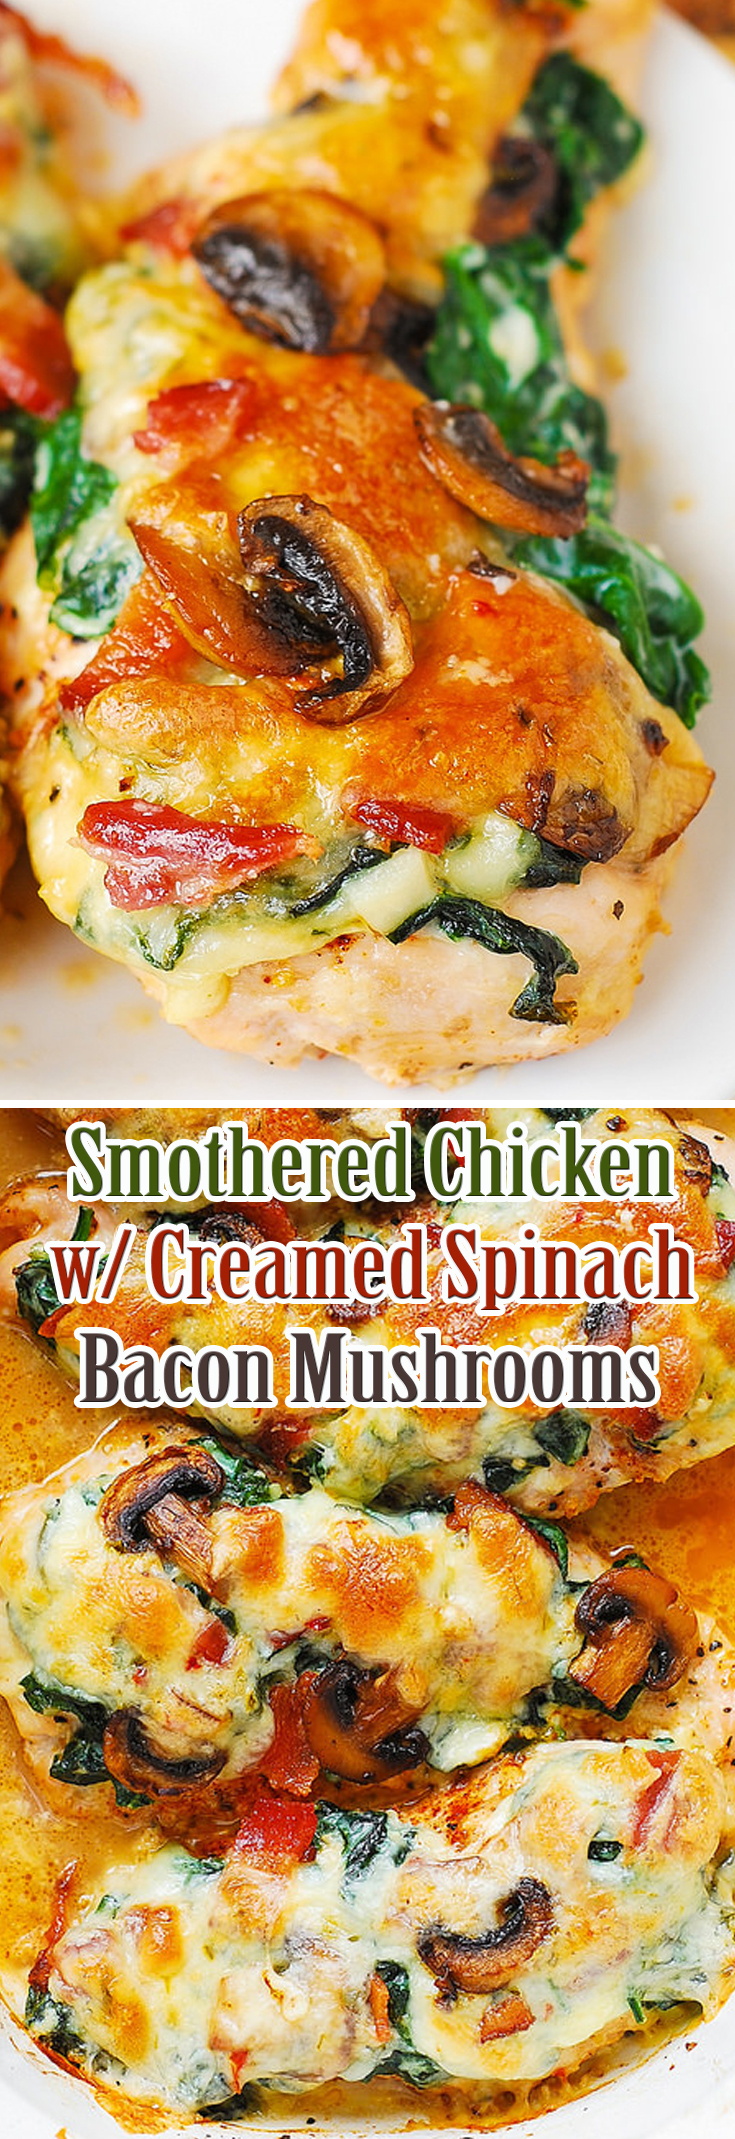 Smothered Chicken with Creamed Spinach Bacon Mushrooms